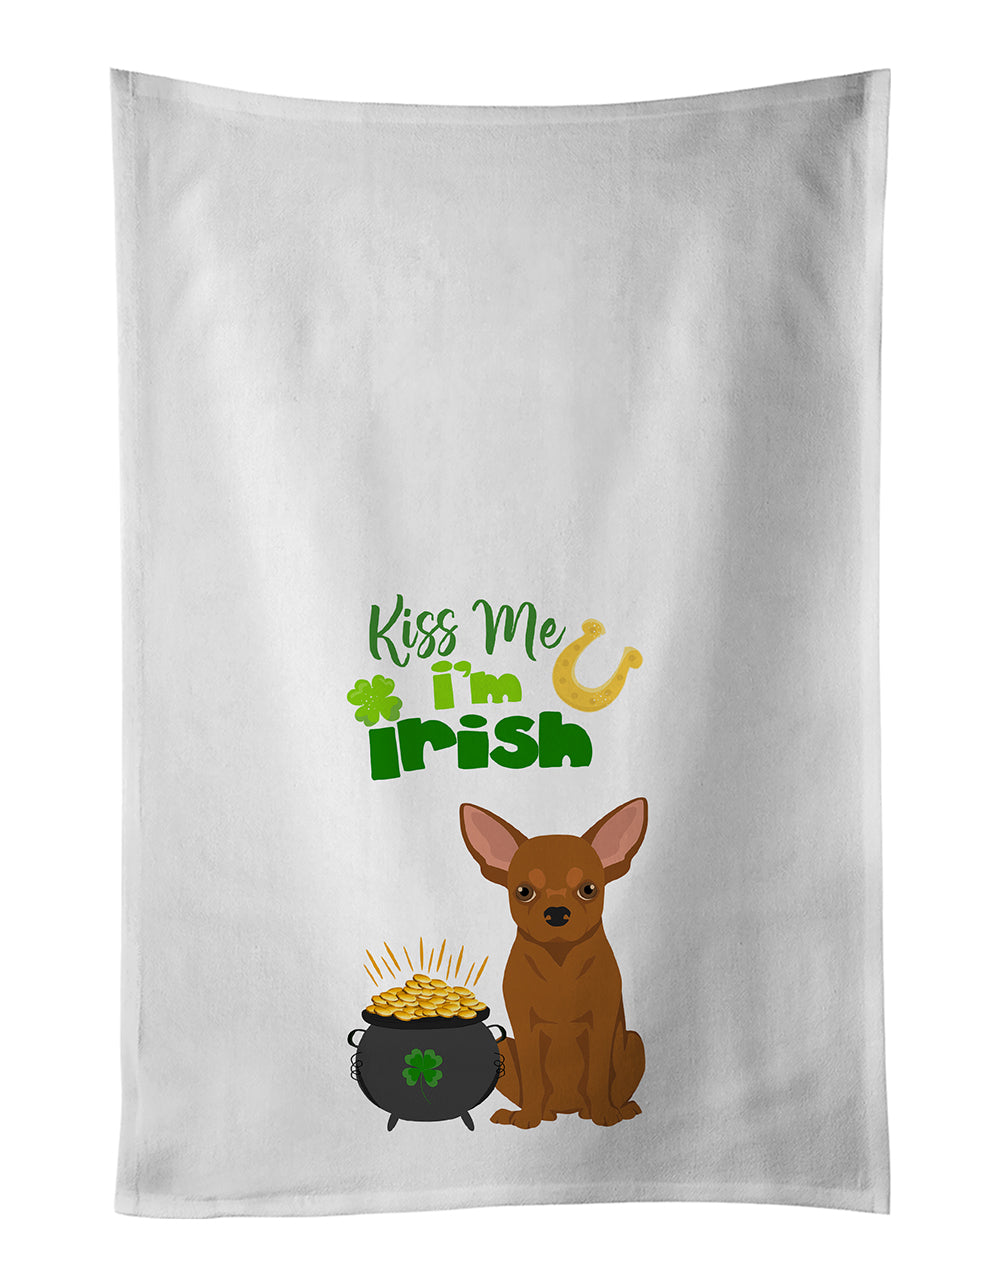 Buy this Red Chihuahua St. Patrick's Day White Kitchen Towel Set of 2 Dish Towels